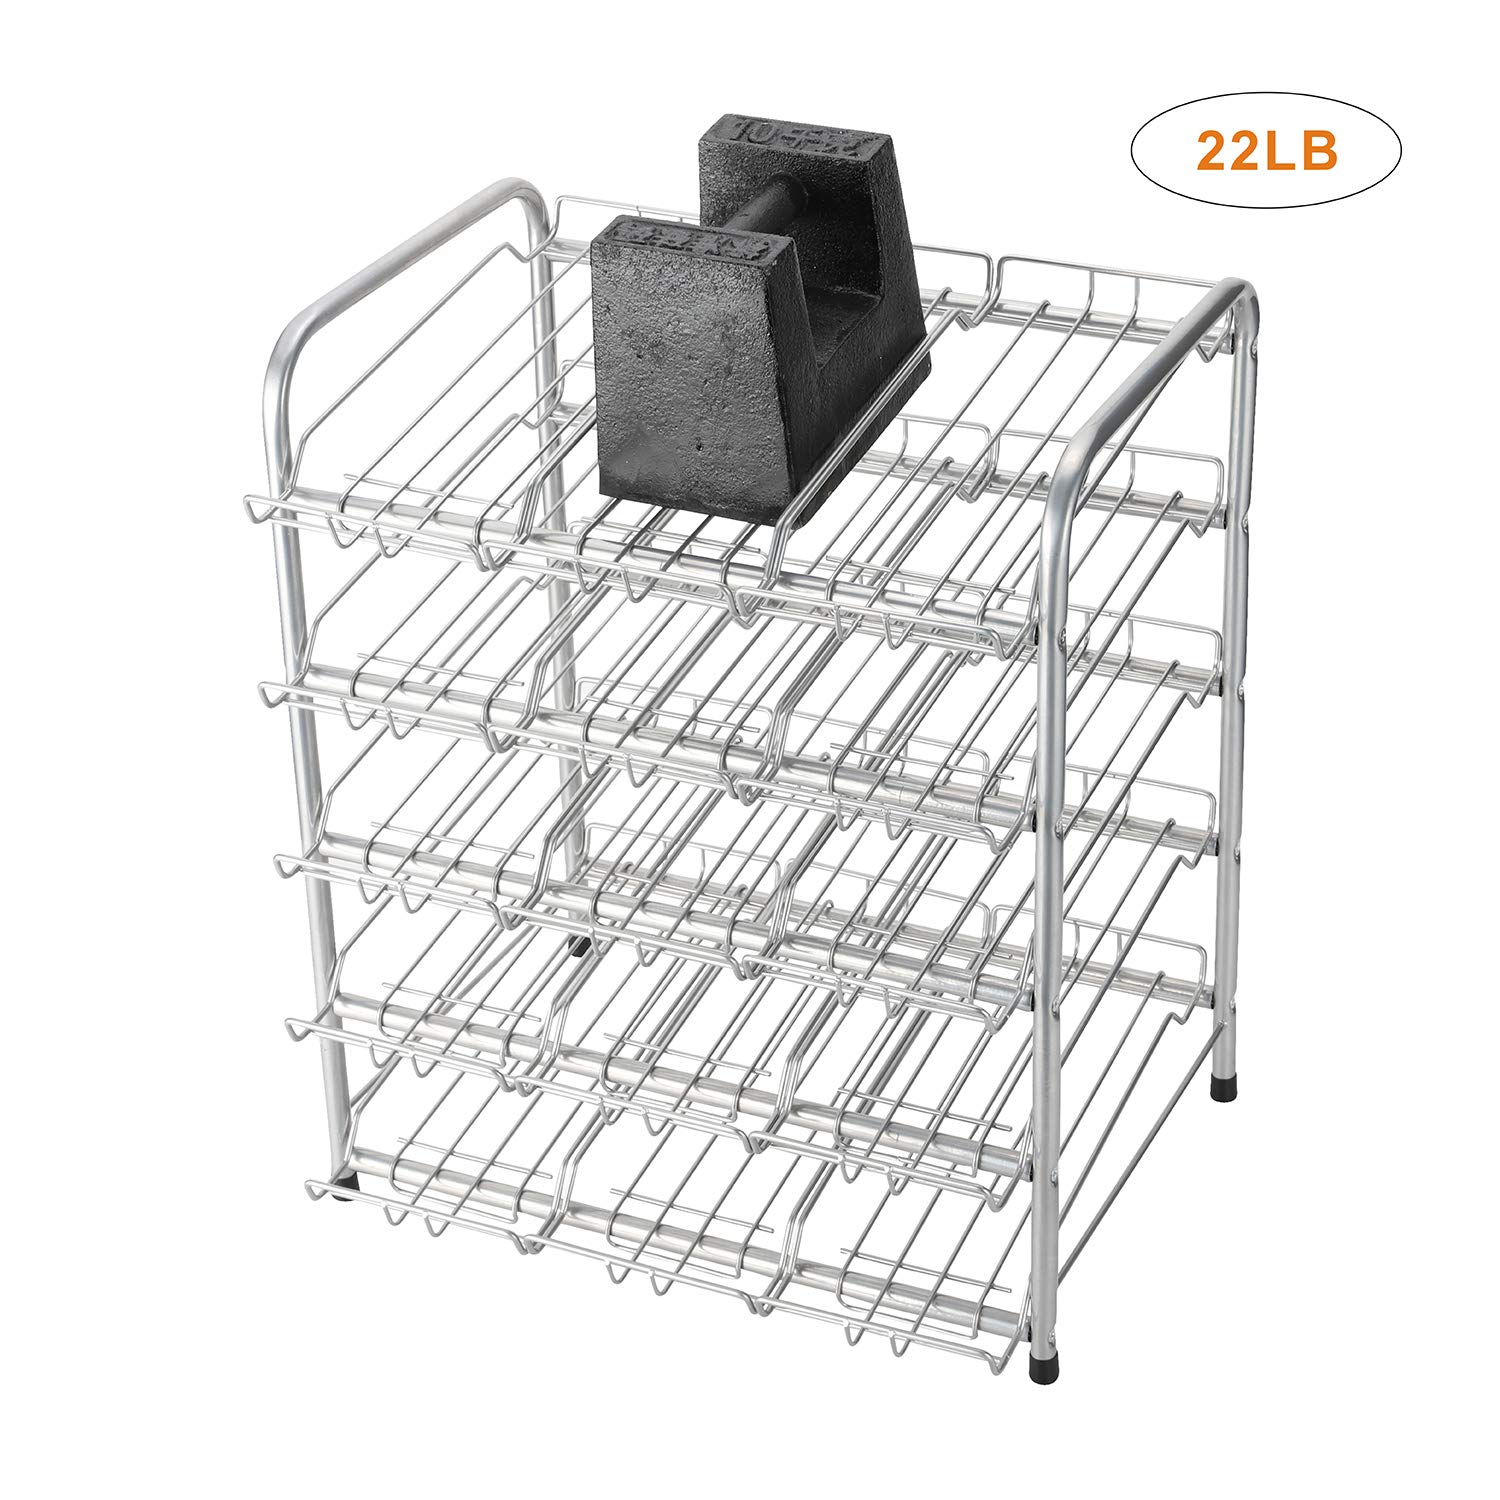 Rice rat Can Organizer for Pantry, Can Rack Can Storage Dispenser for Canned Food (5 tiers)